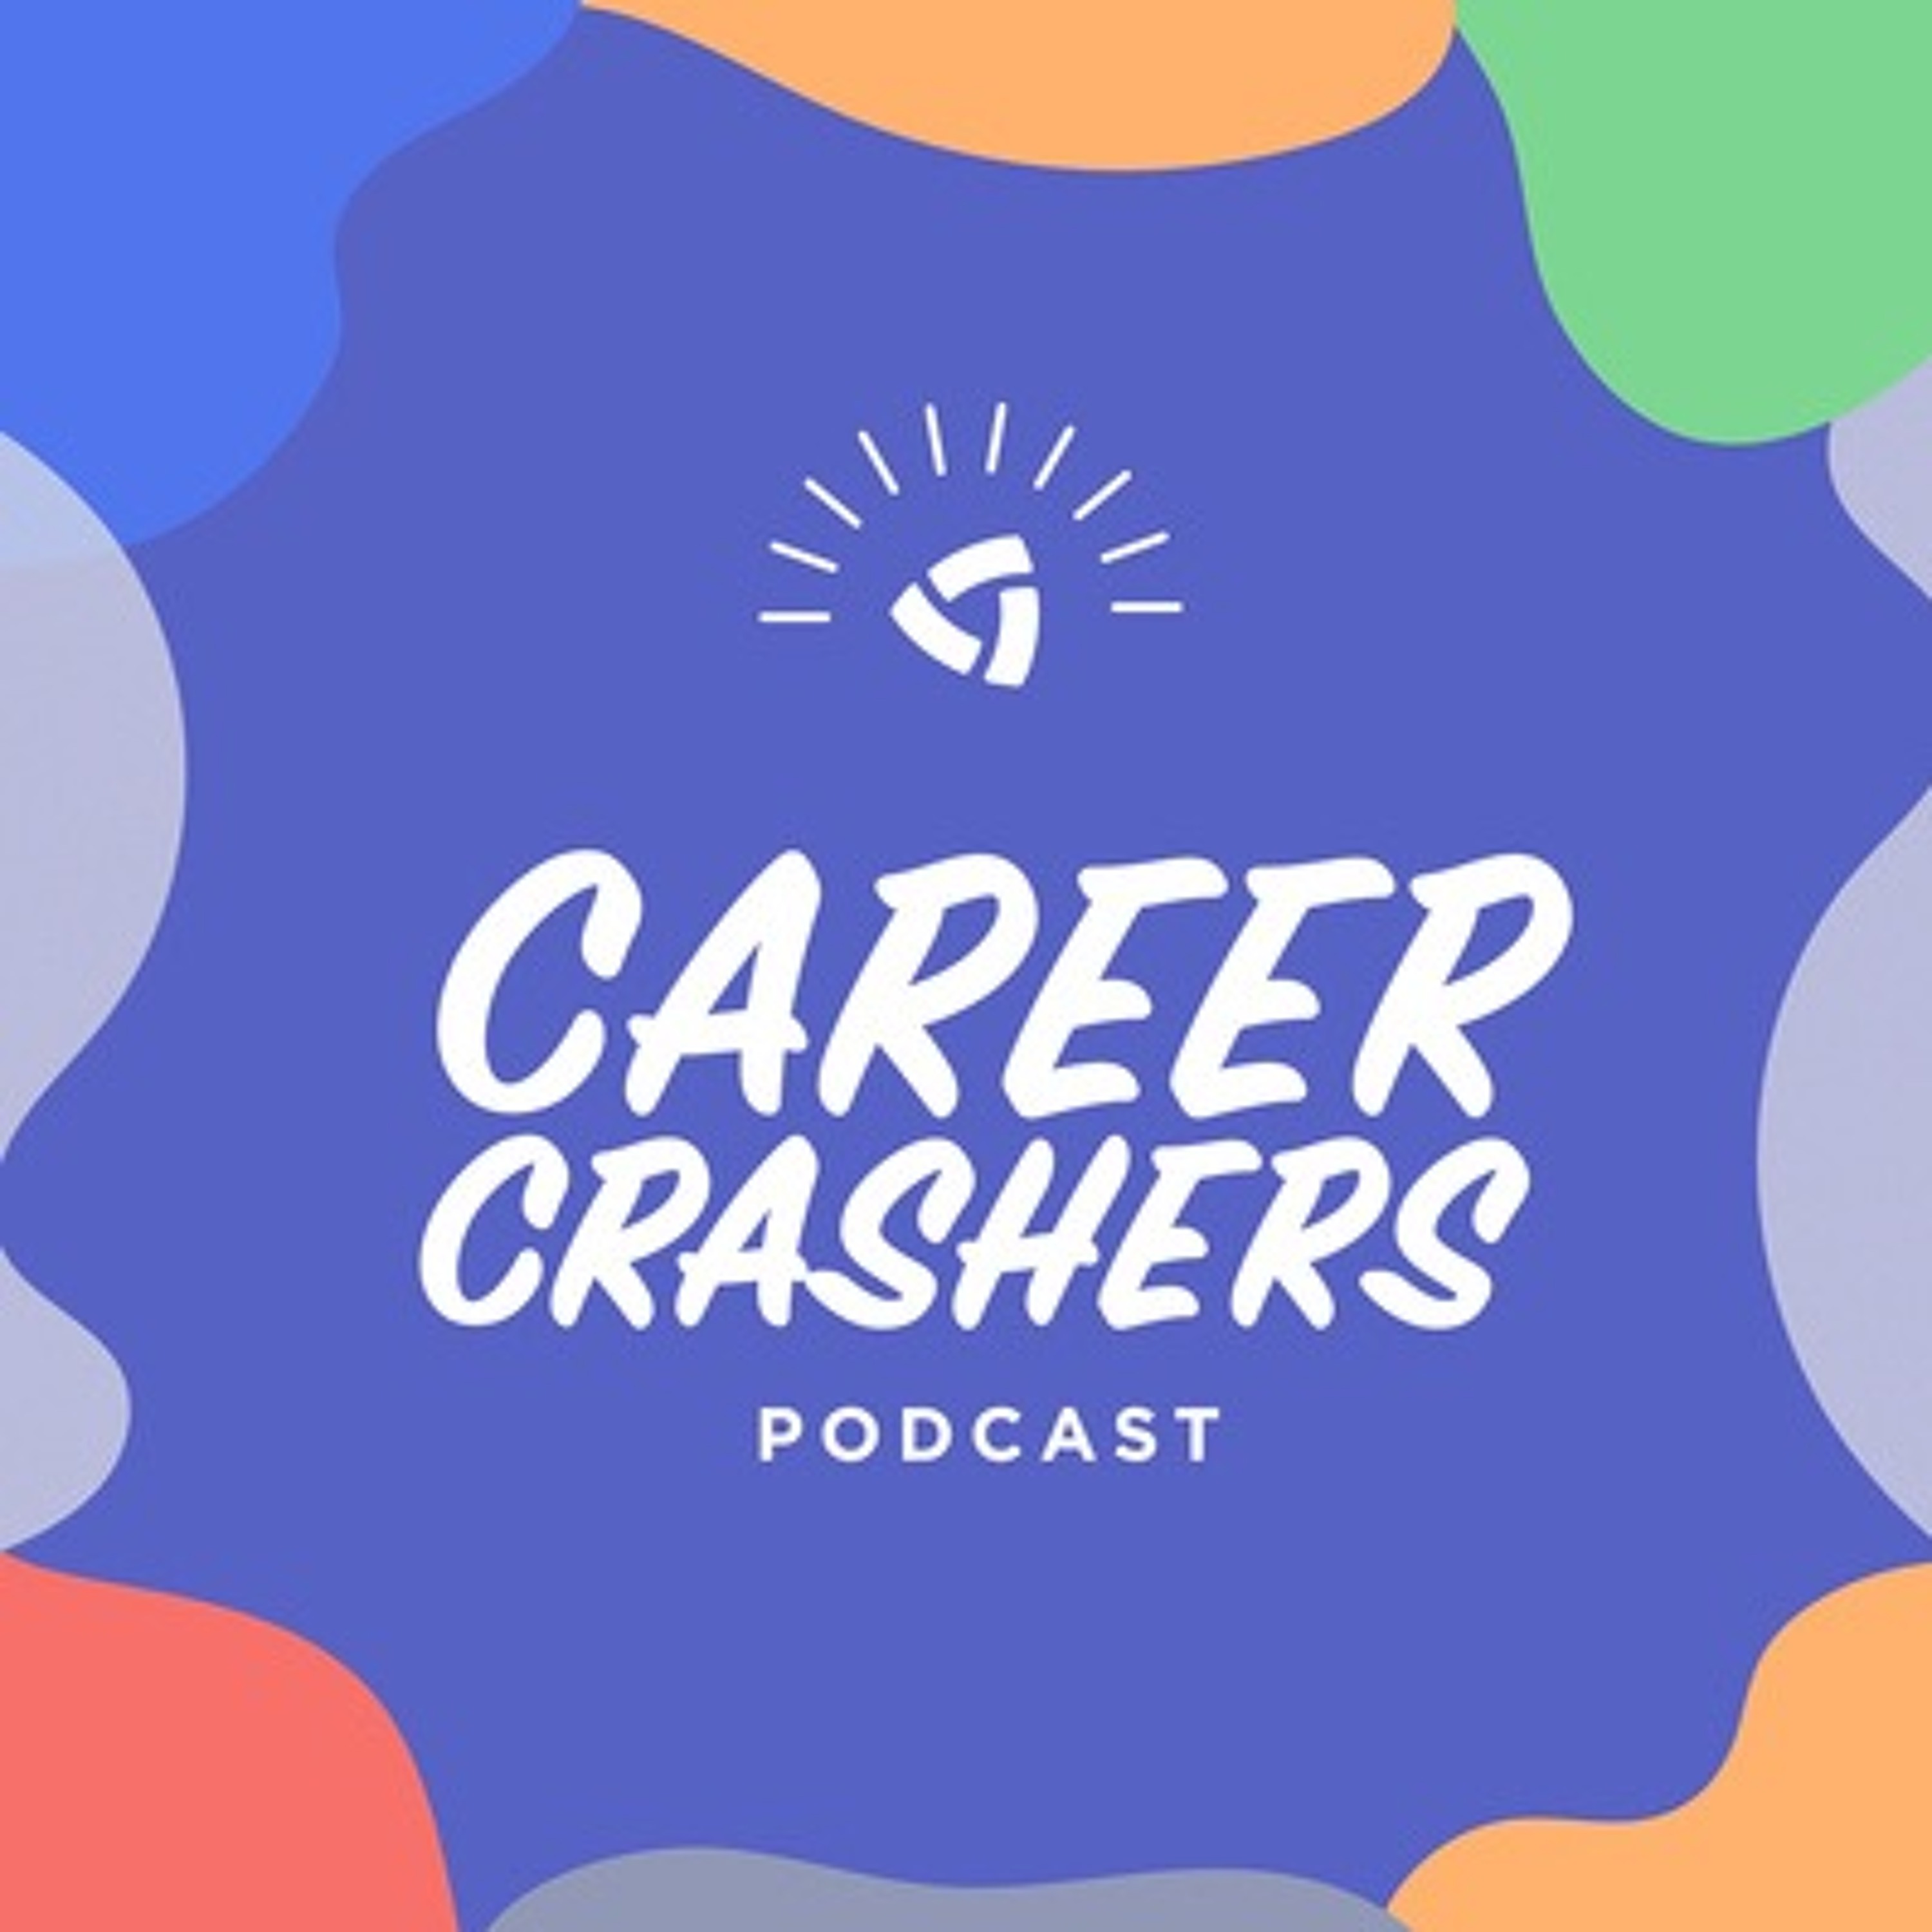 Career Crashers - 3 Tips for Successful Interviews